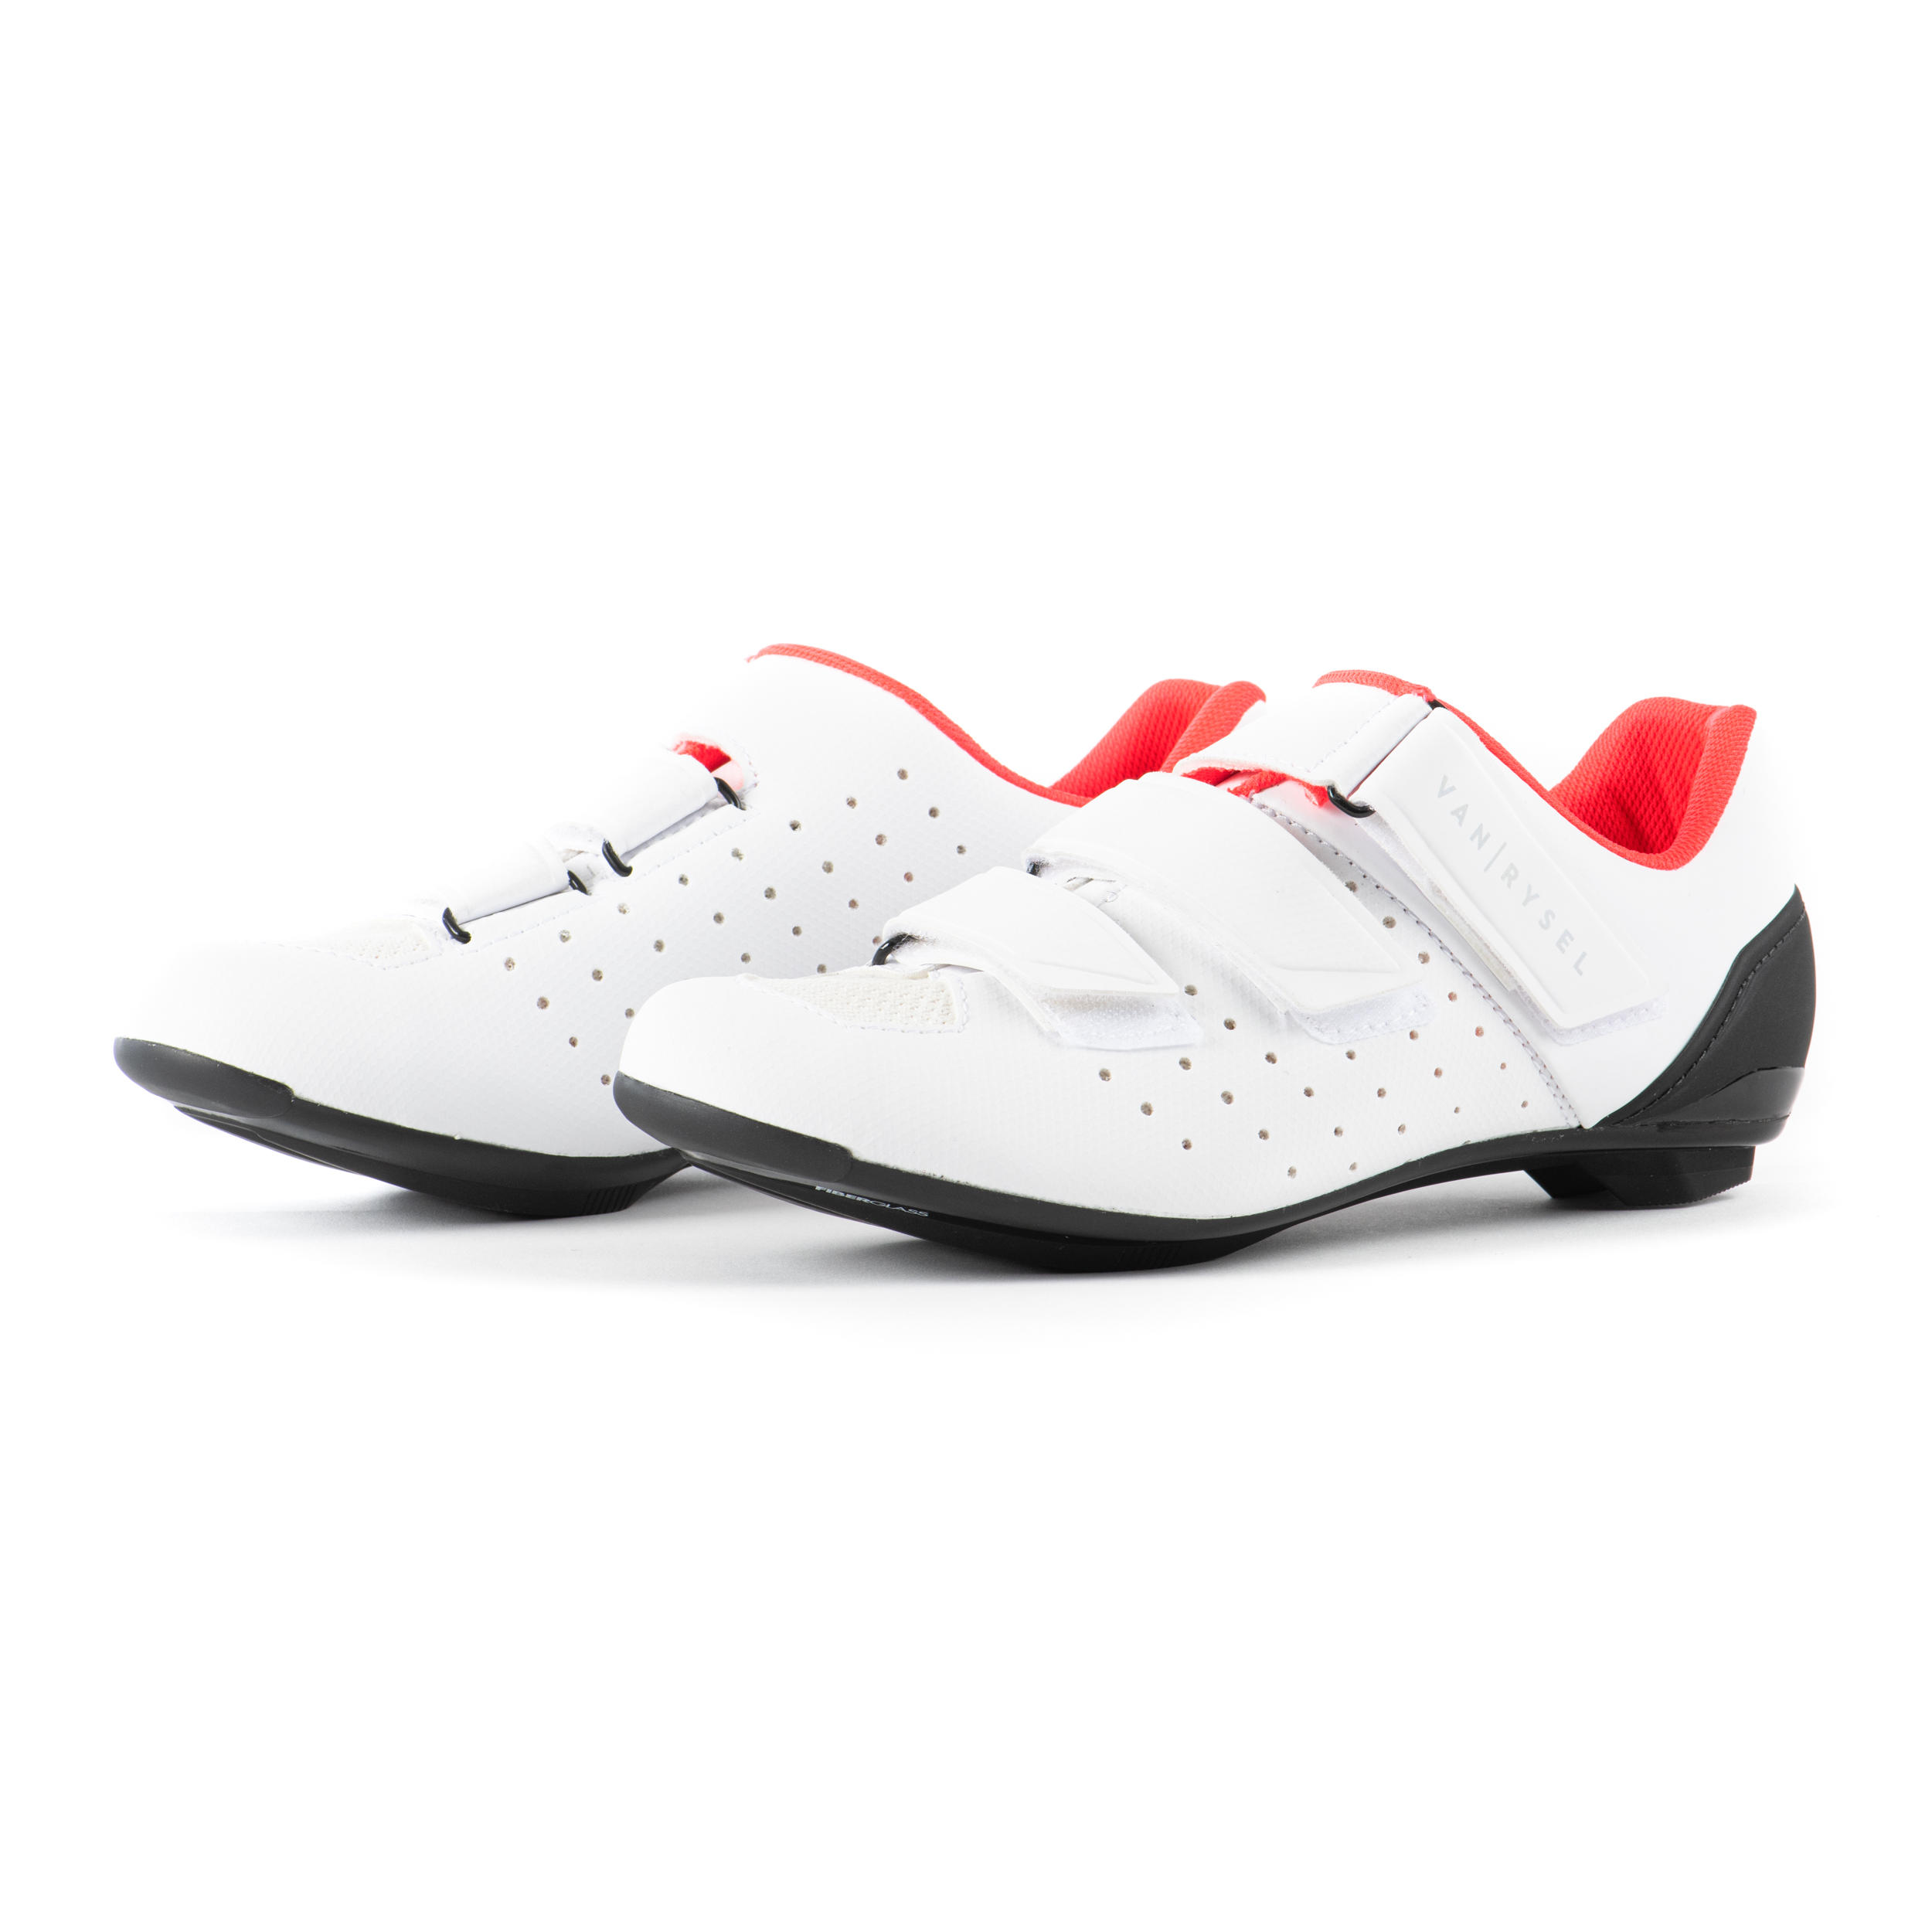 RCR500 Women's Road Cycling Shoes - White 1/4